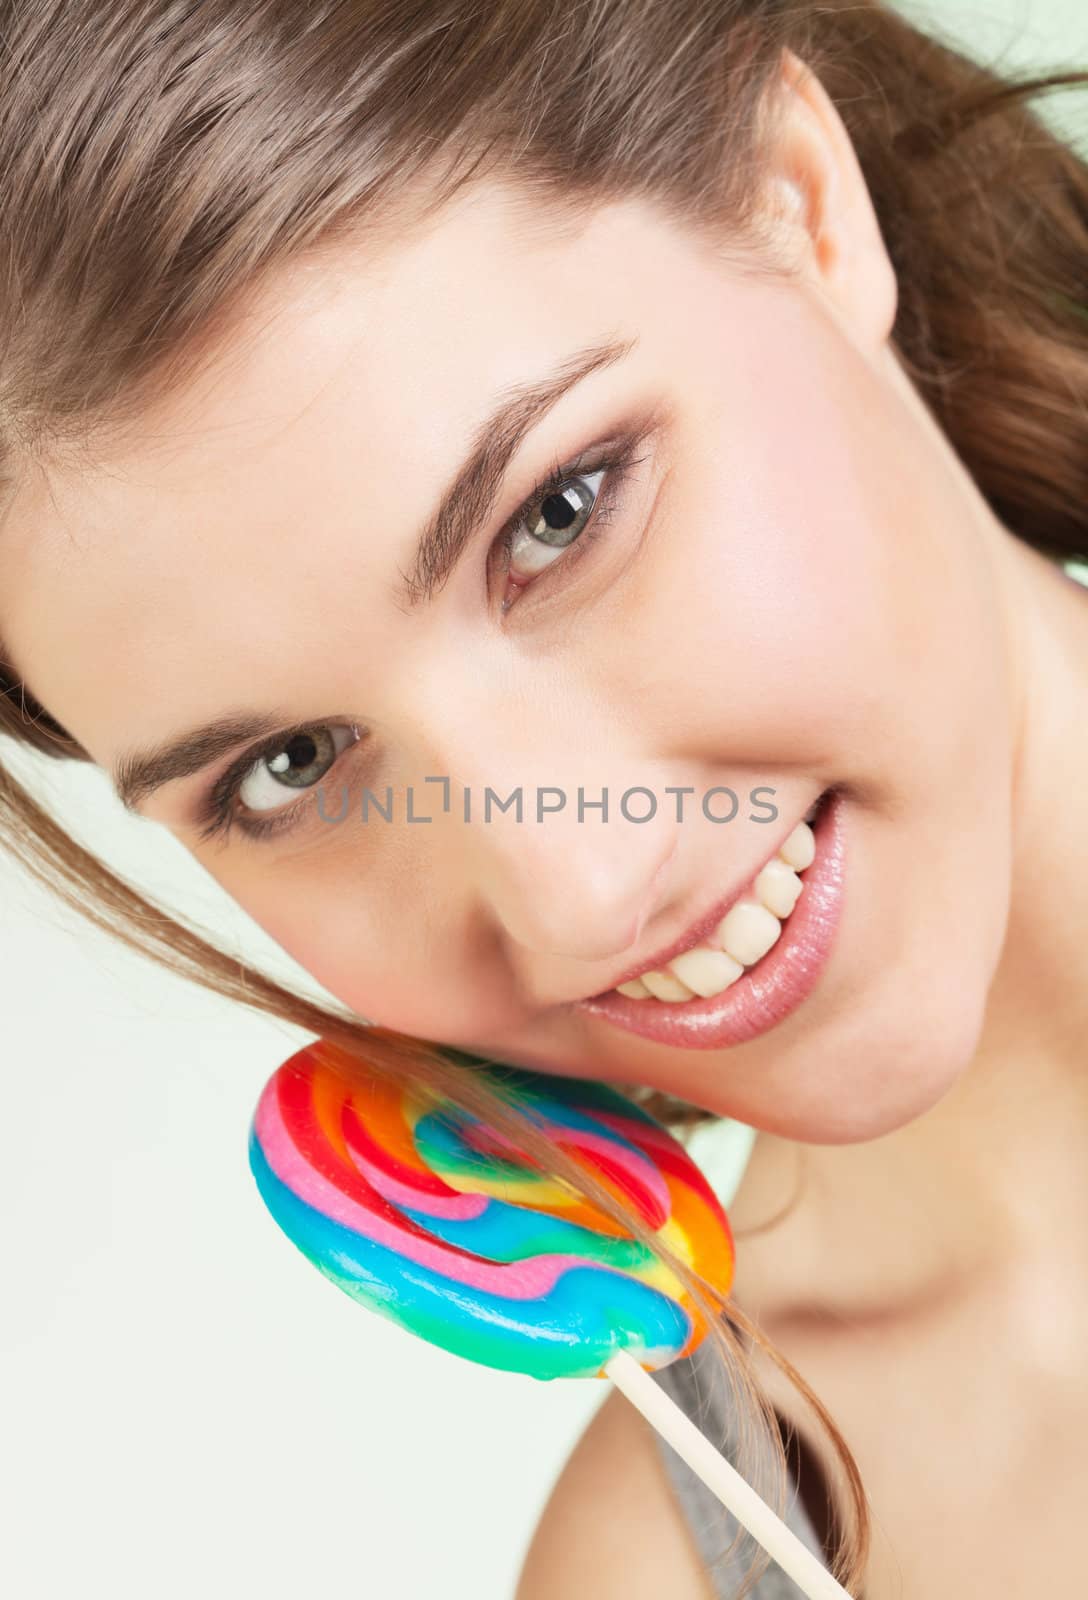 Portrait of smiling teenager girl holding colorful lollipop